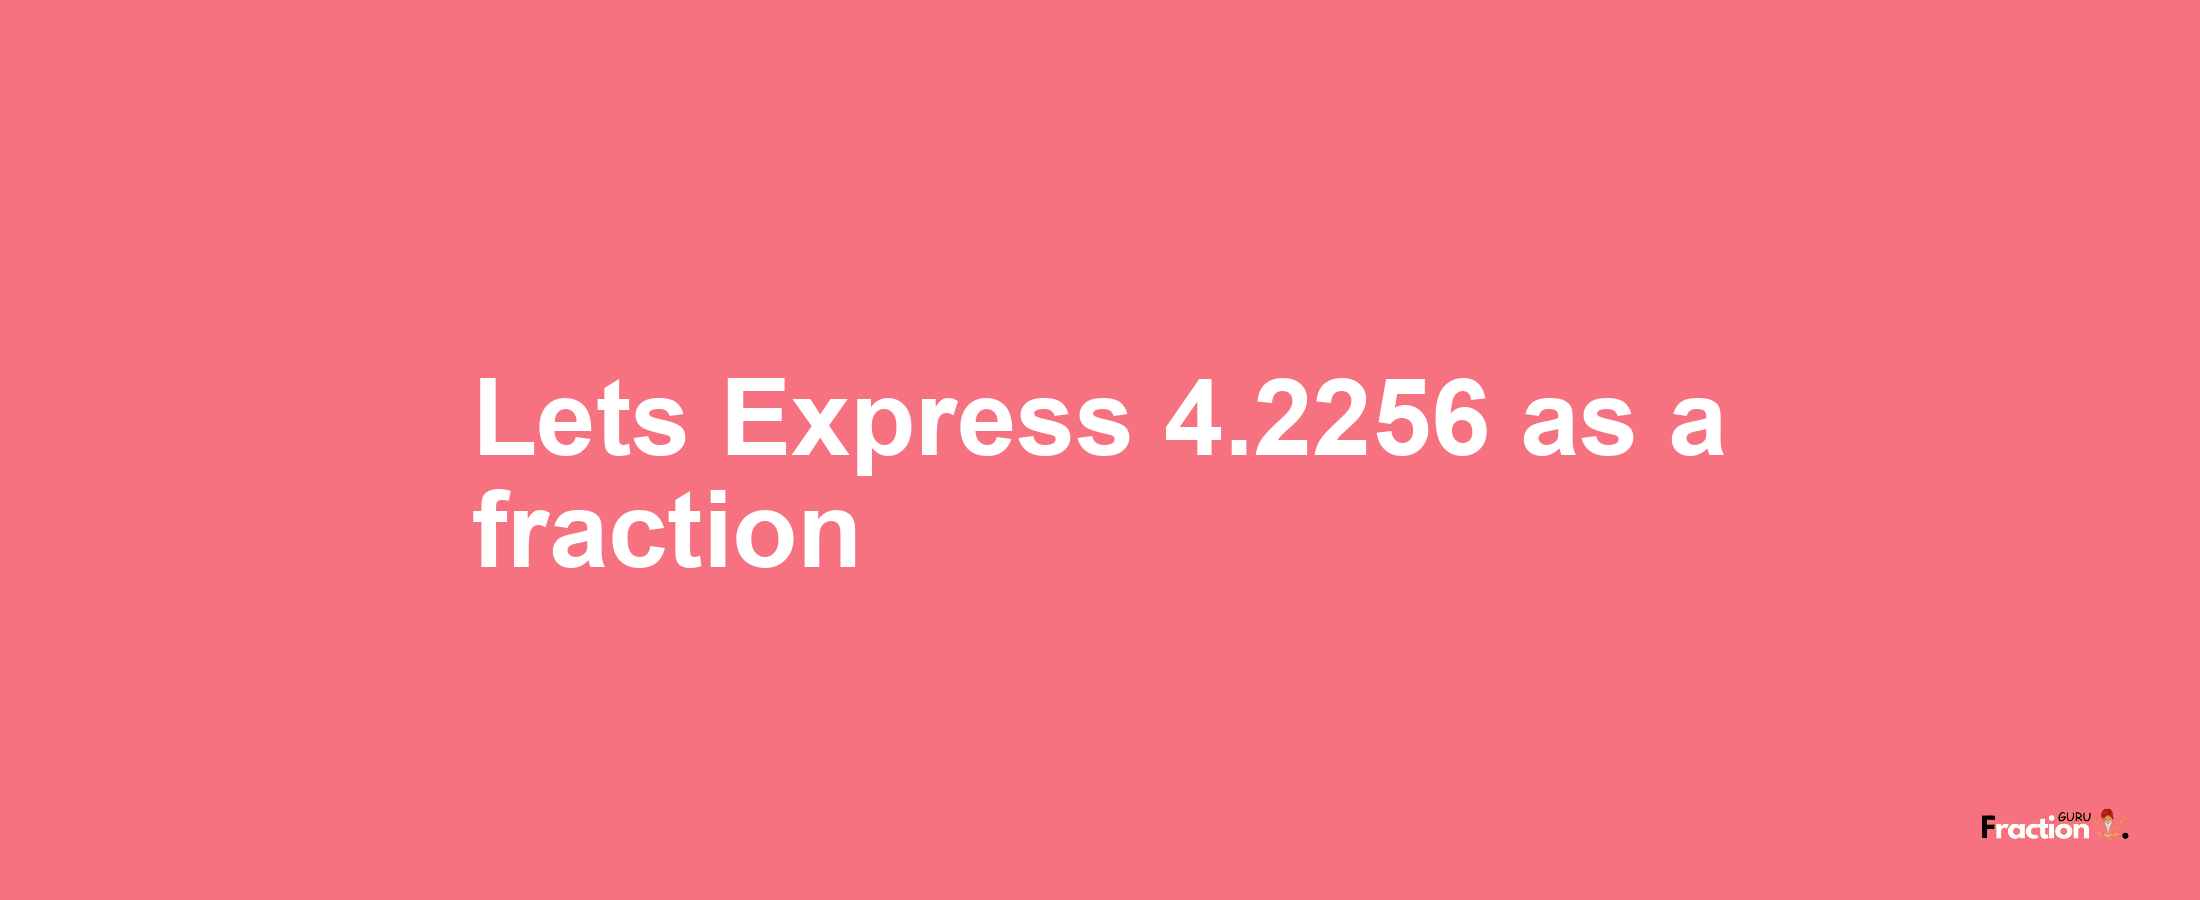 Lets Express 4.2256 as afraction